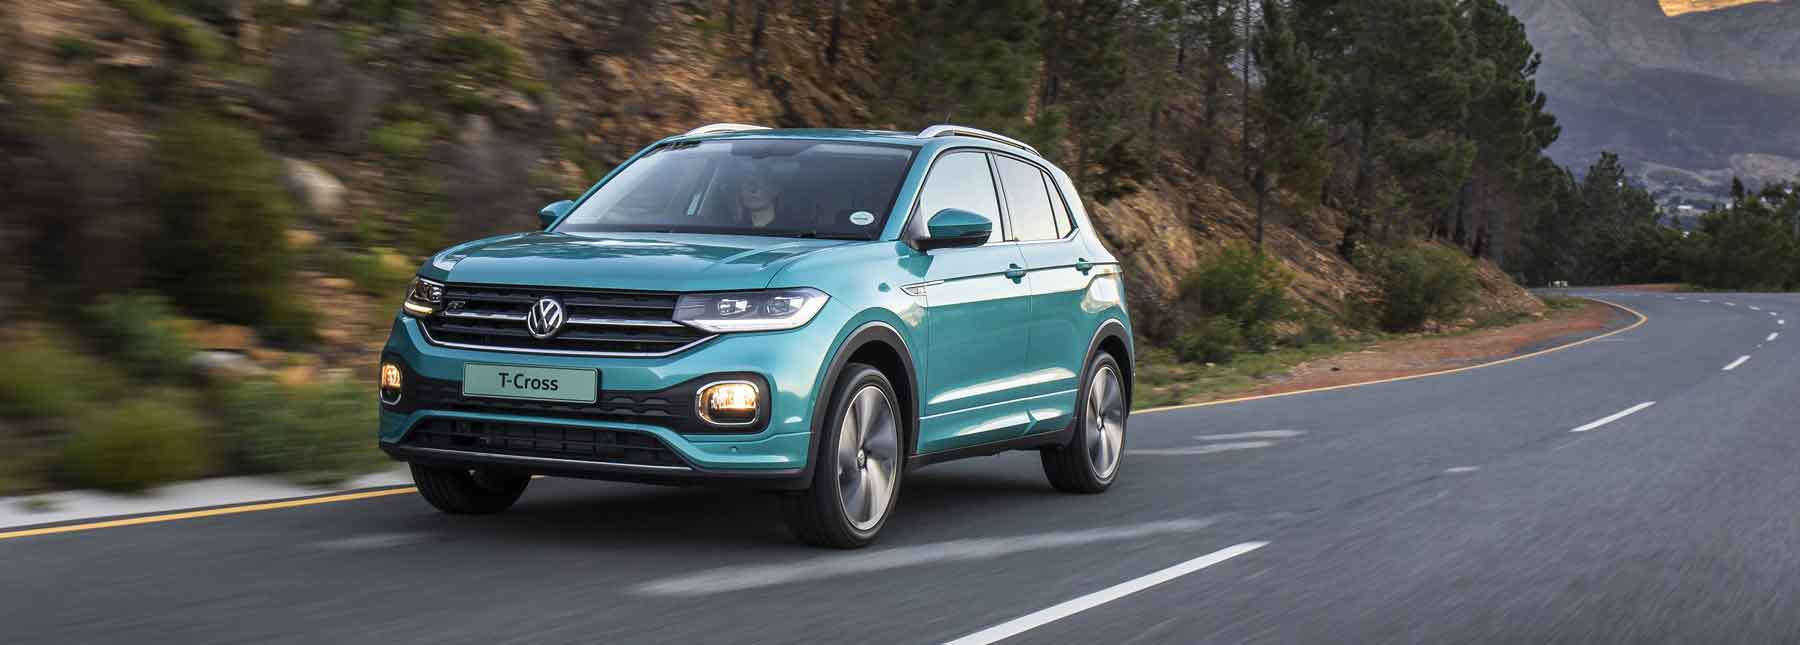 Let’s get out of town: Volkswagen T-Cross 